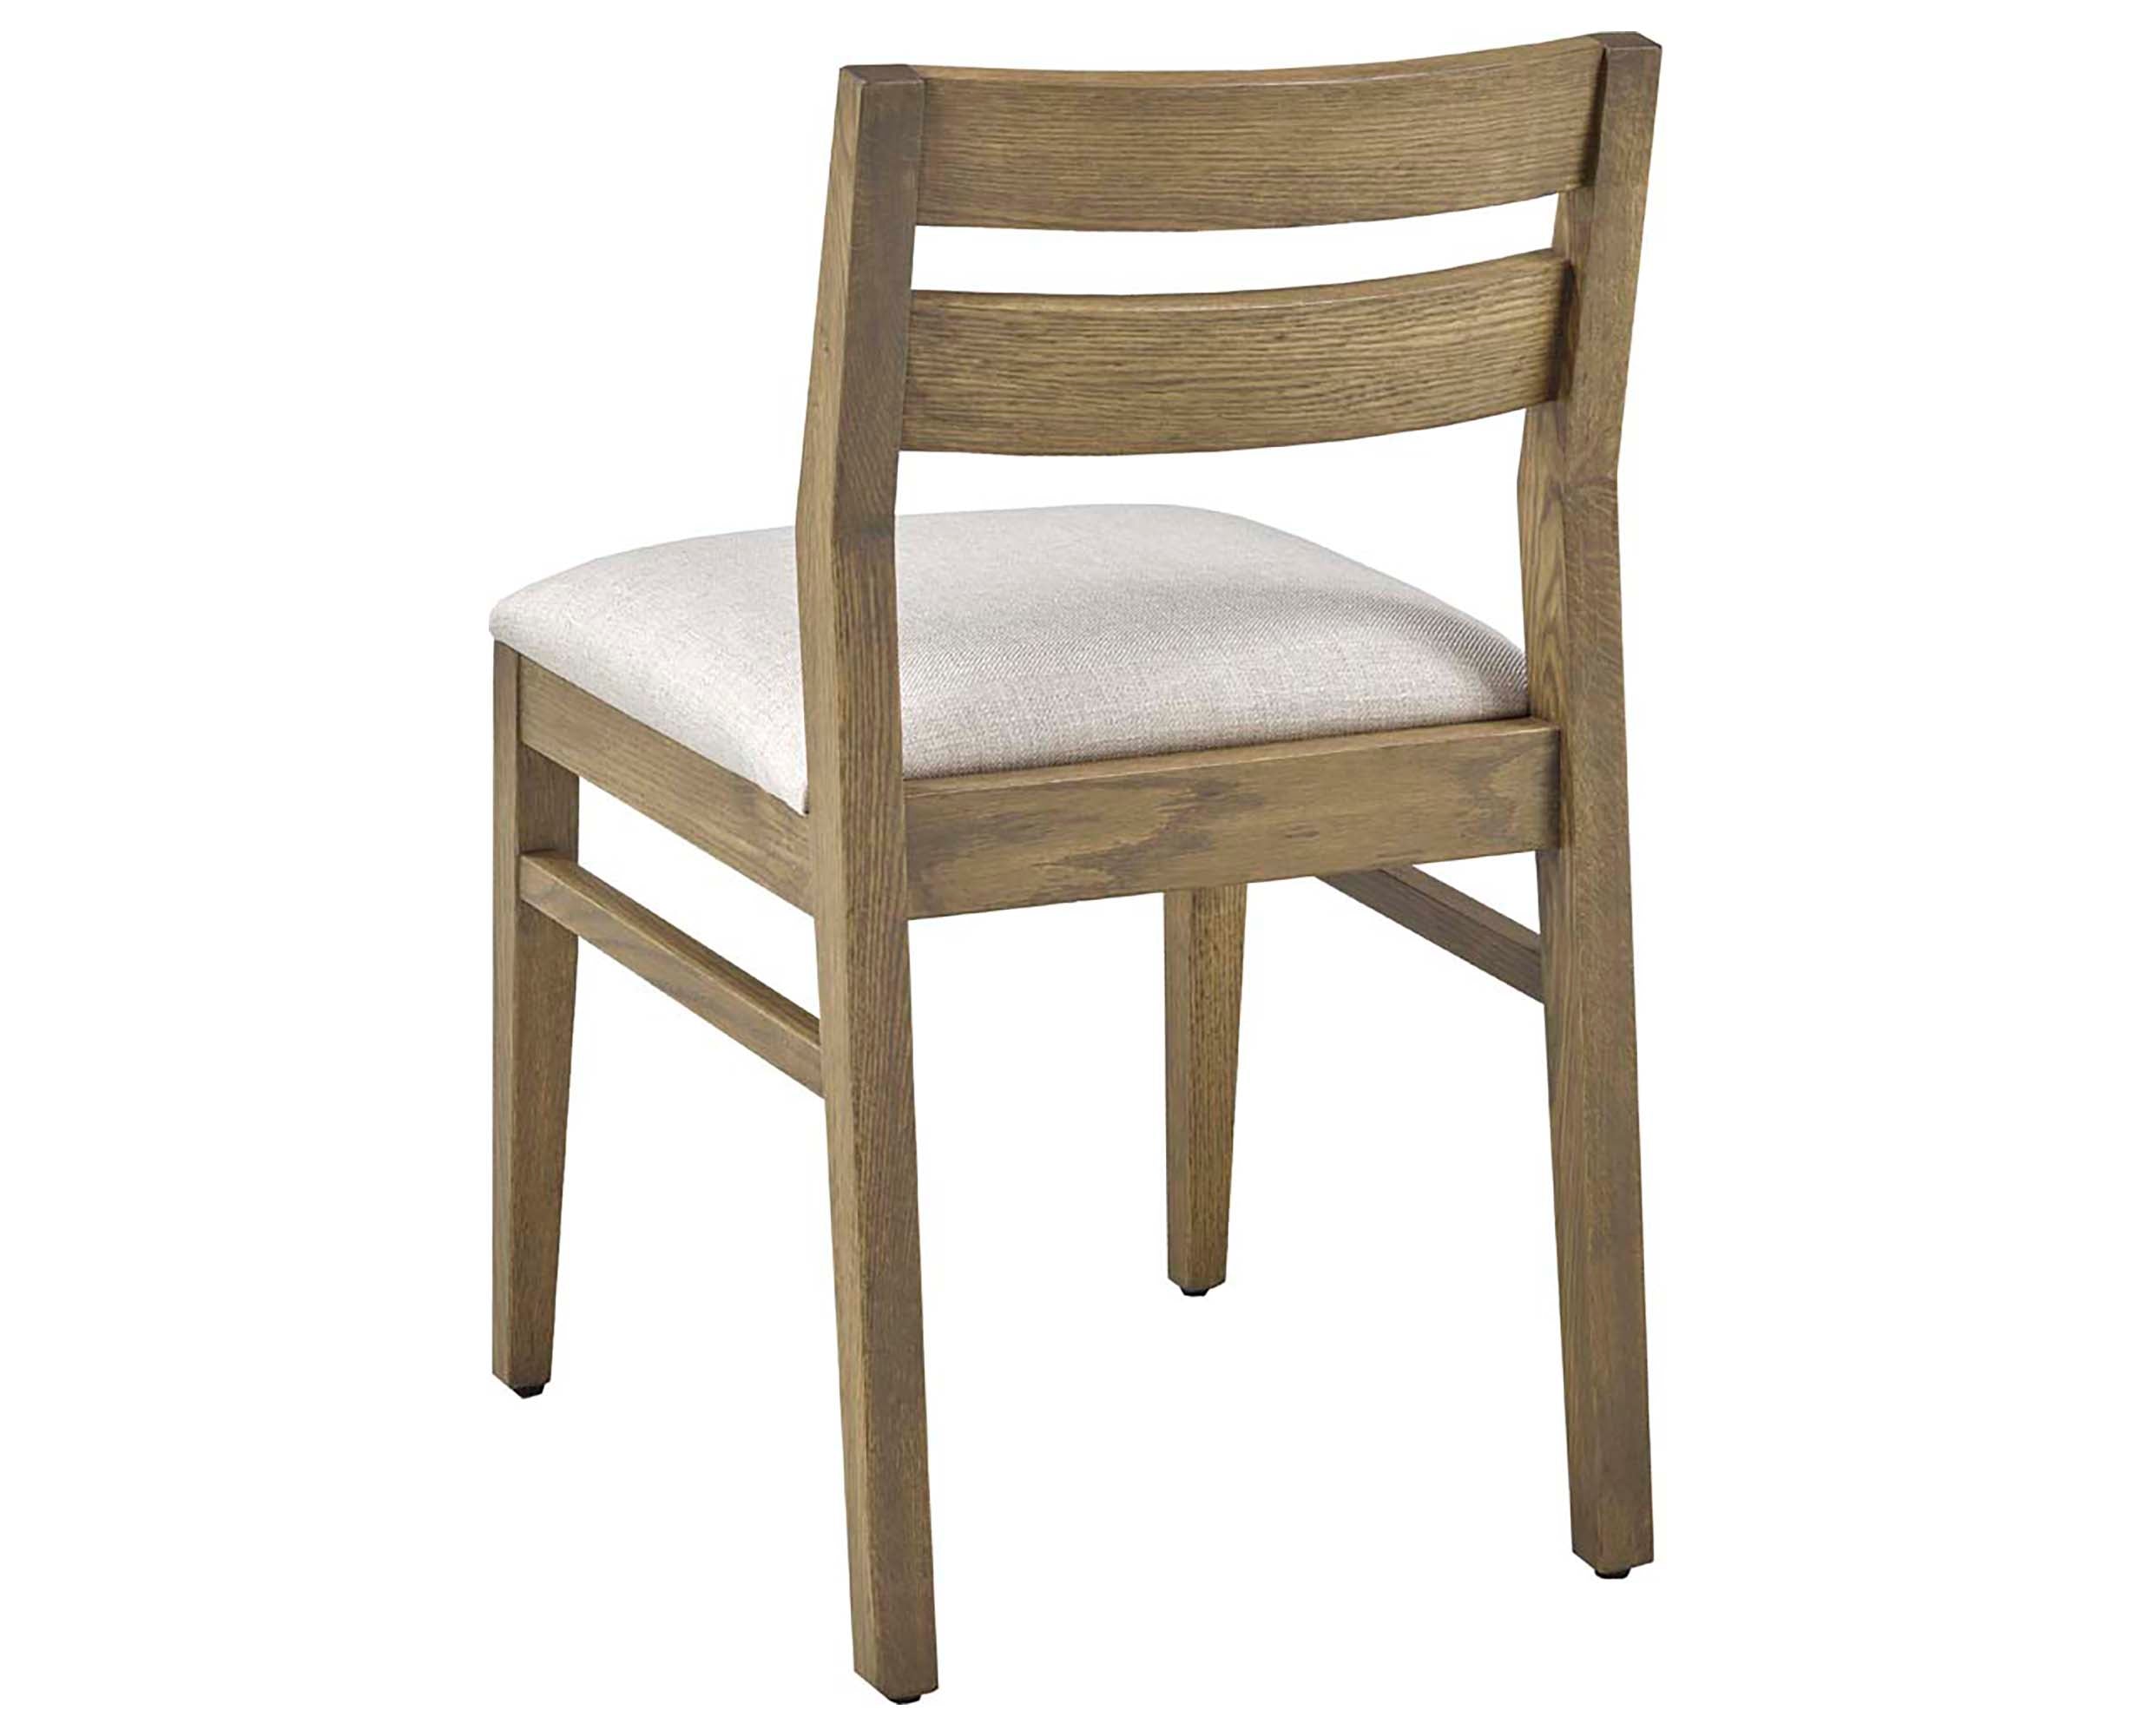 Chair as Shown | Cardinal Woodcraft Rehvo Dining Chair | Valley Ridge Furniture